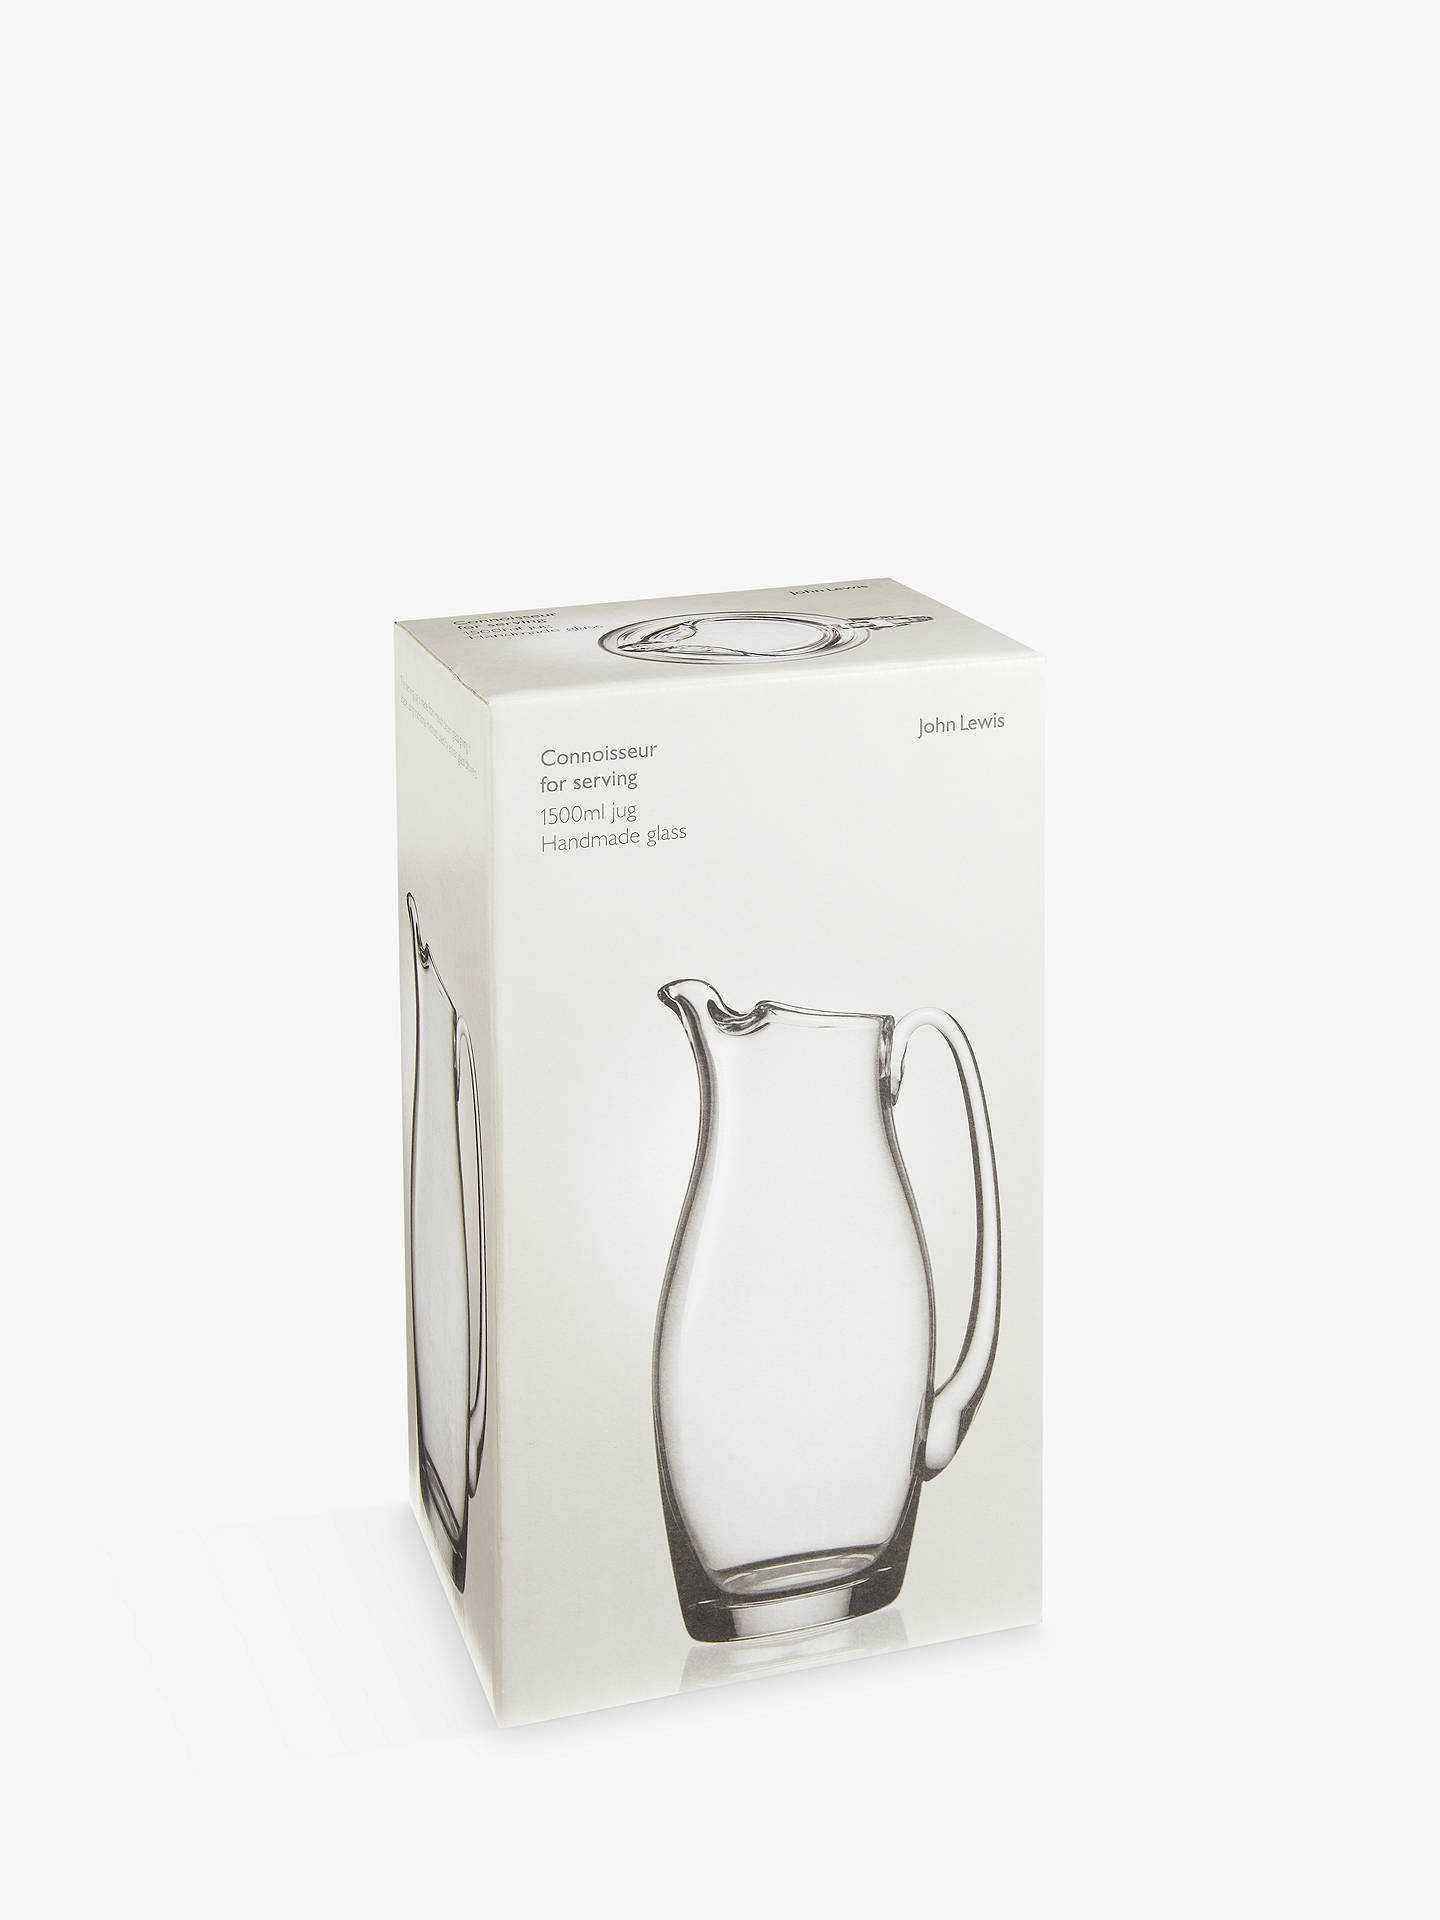 RRP £80 Lot To Contain 2 Boxed Brand New John Lewis Connoisseur 1500Ml Handmade Glass Jugs - Image 2 of 3